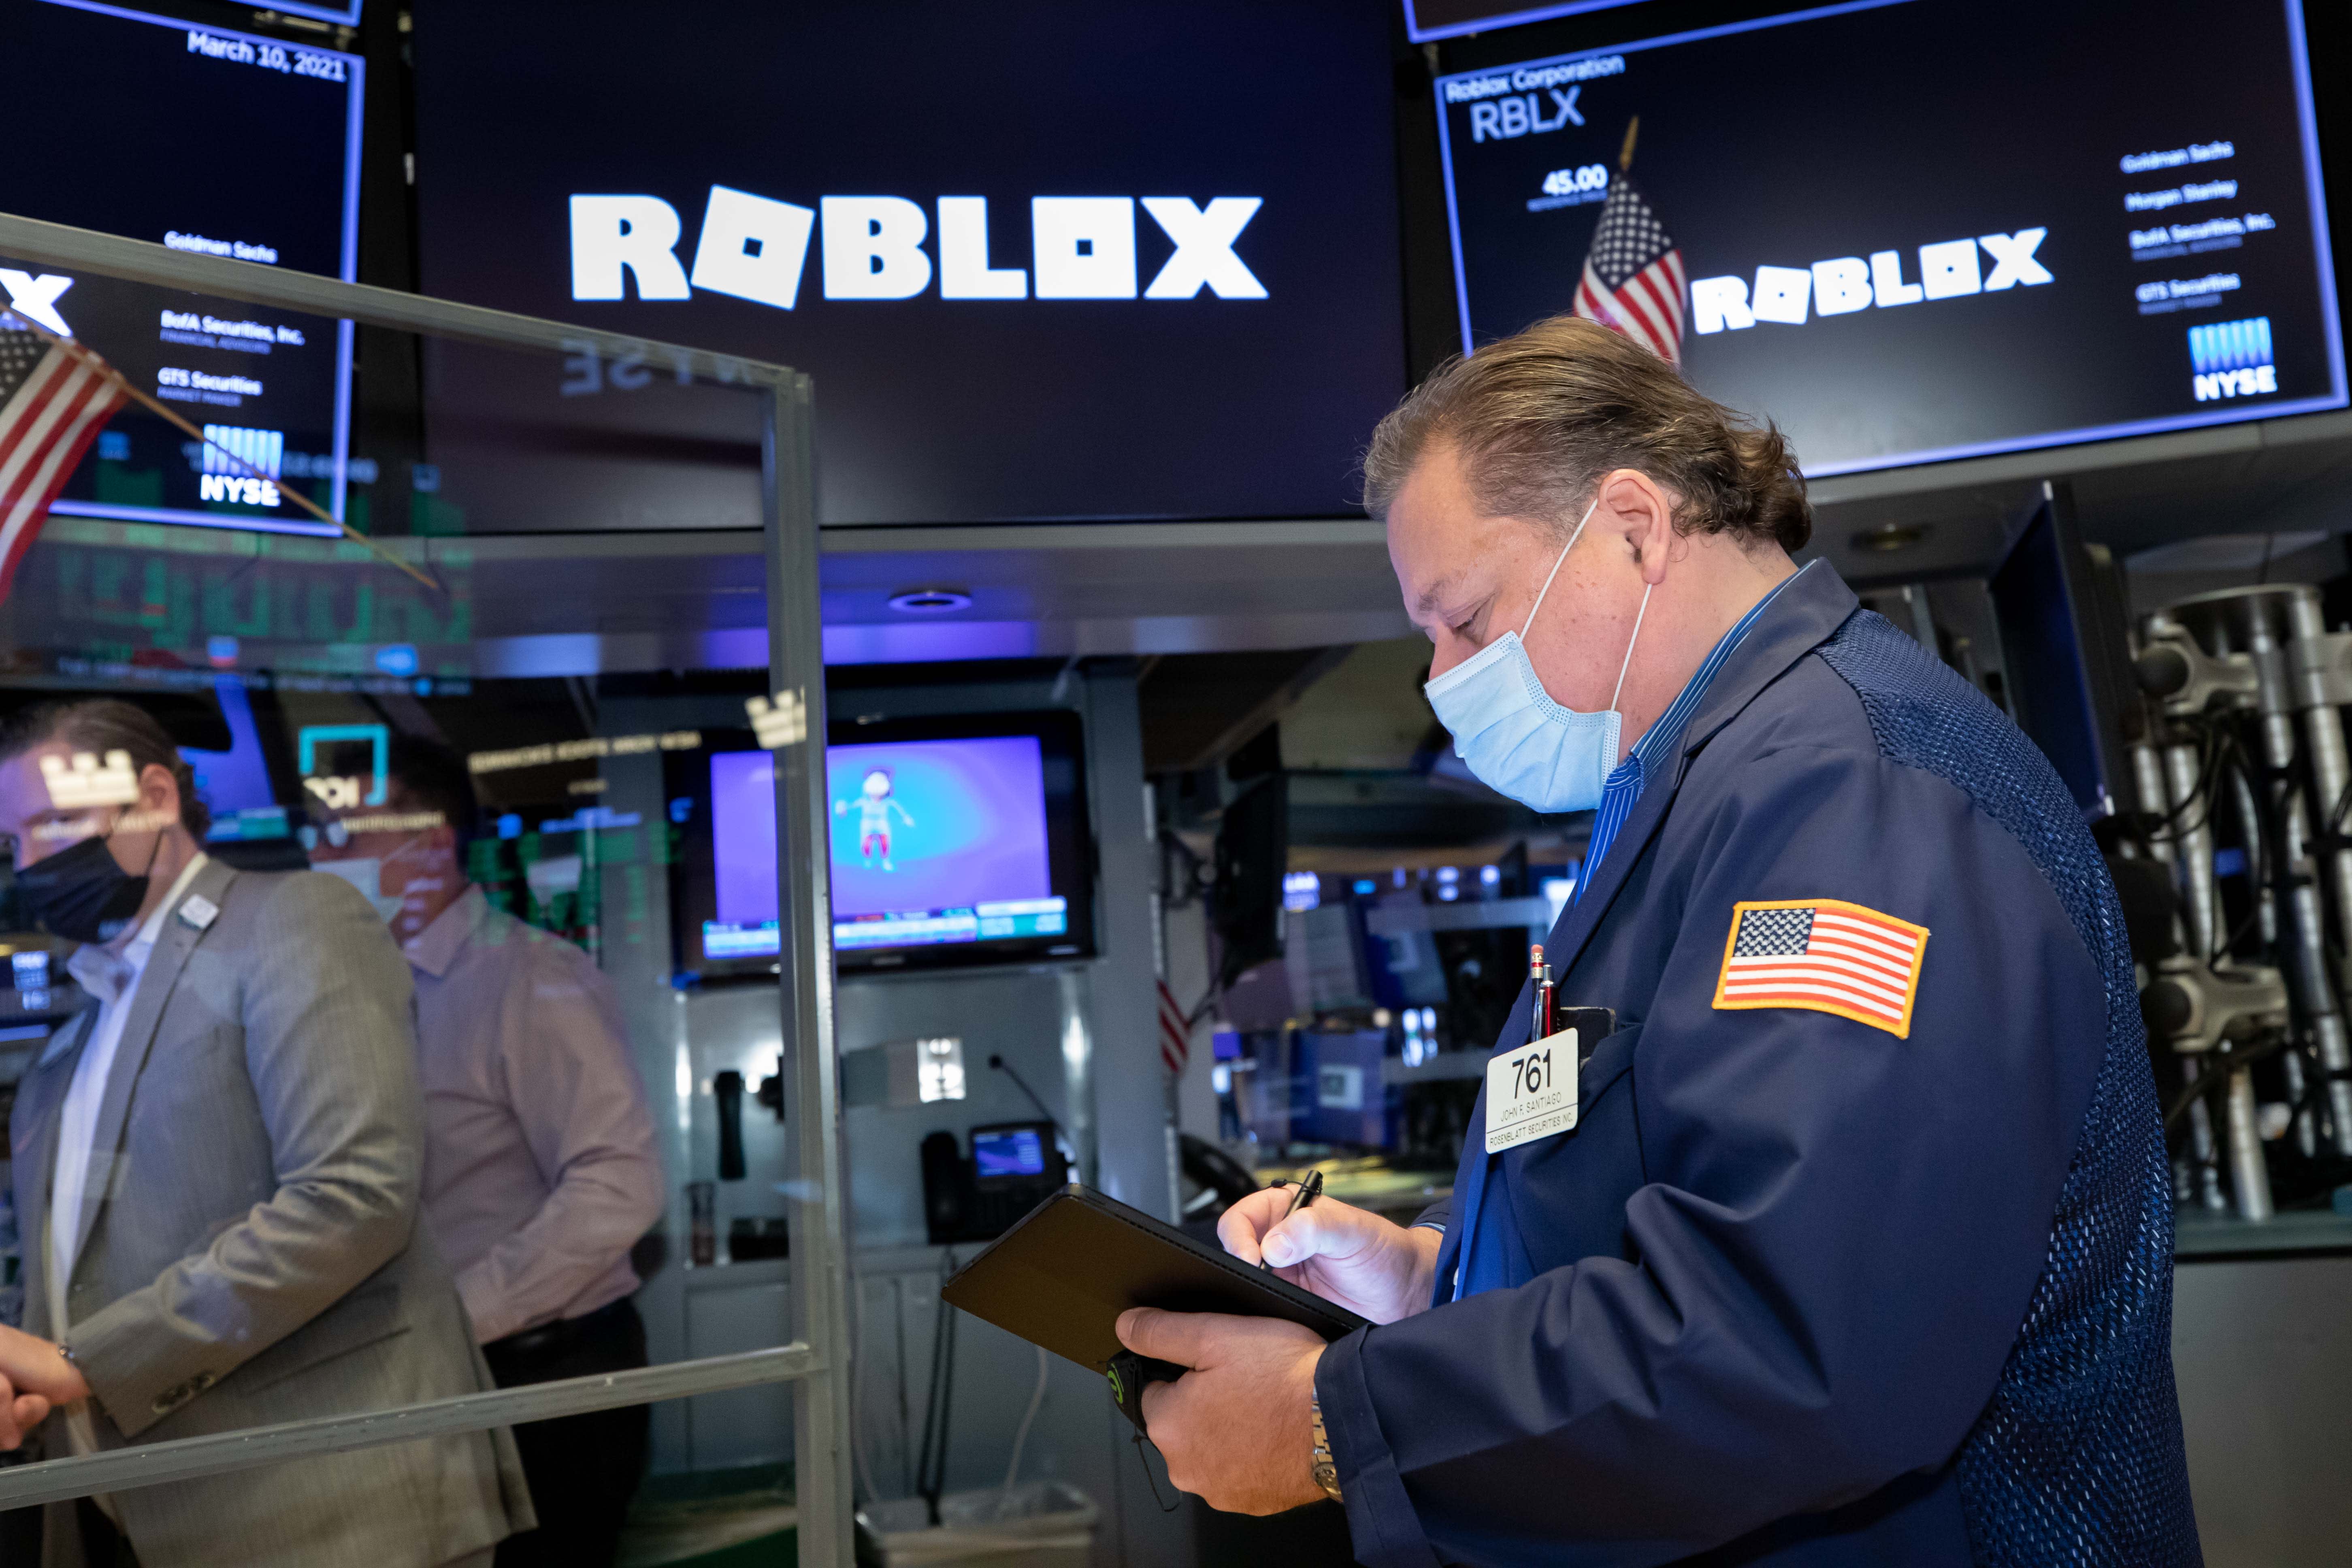 Roblox Corporation $RBLX Q4 2022 Earnings Call 